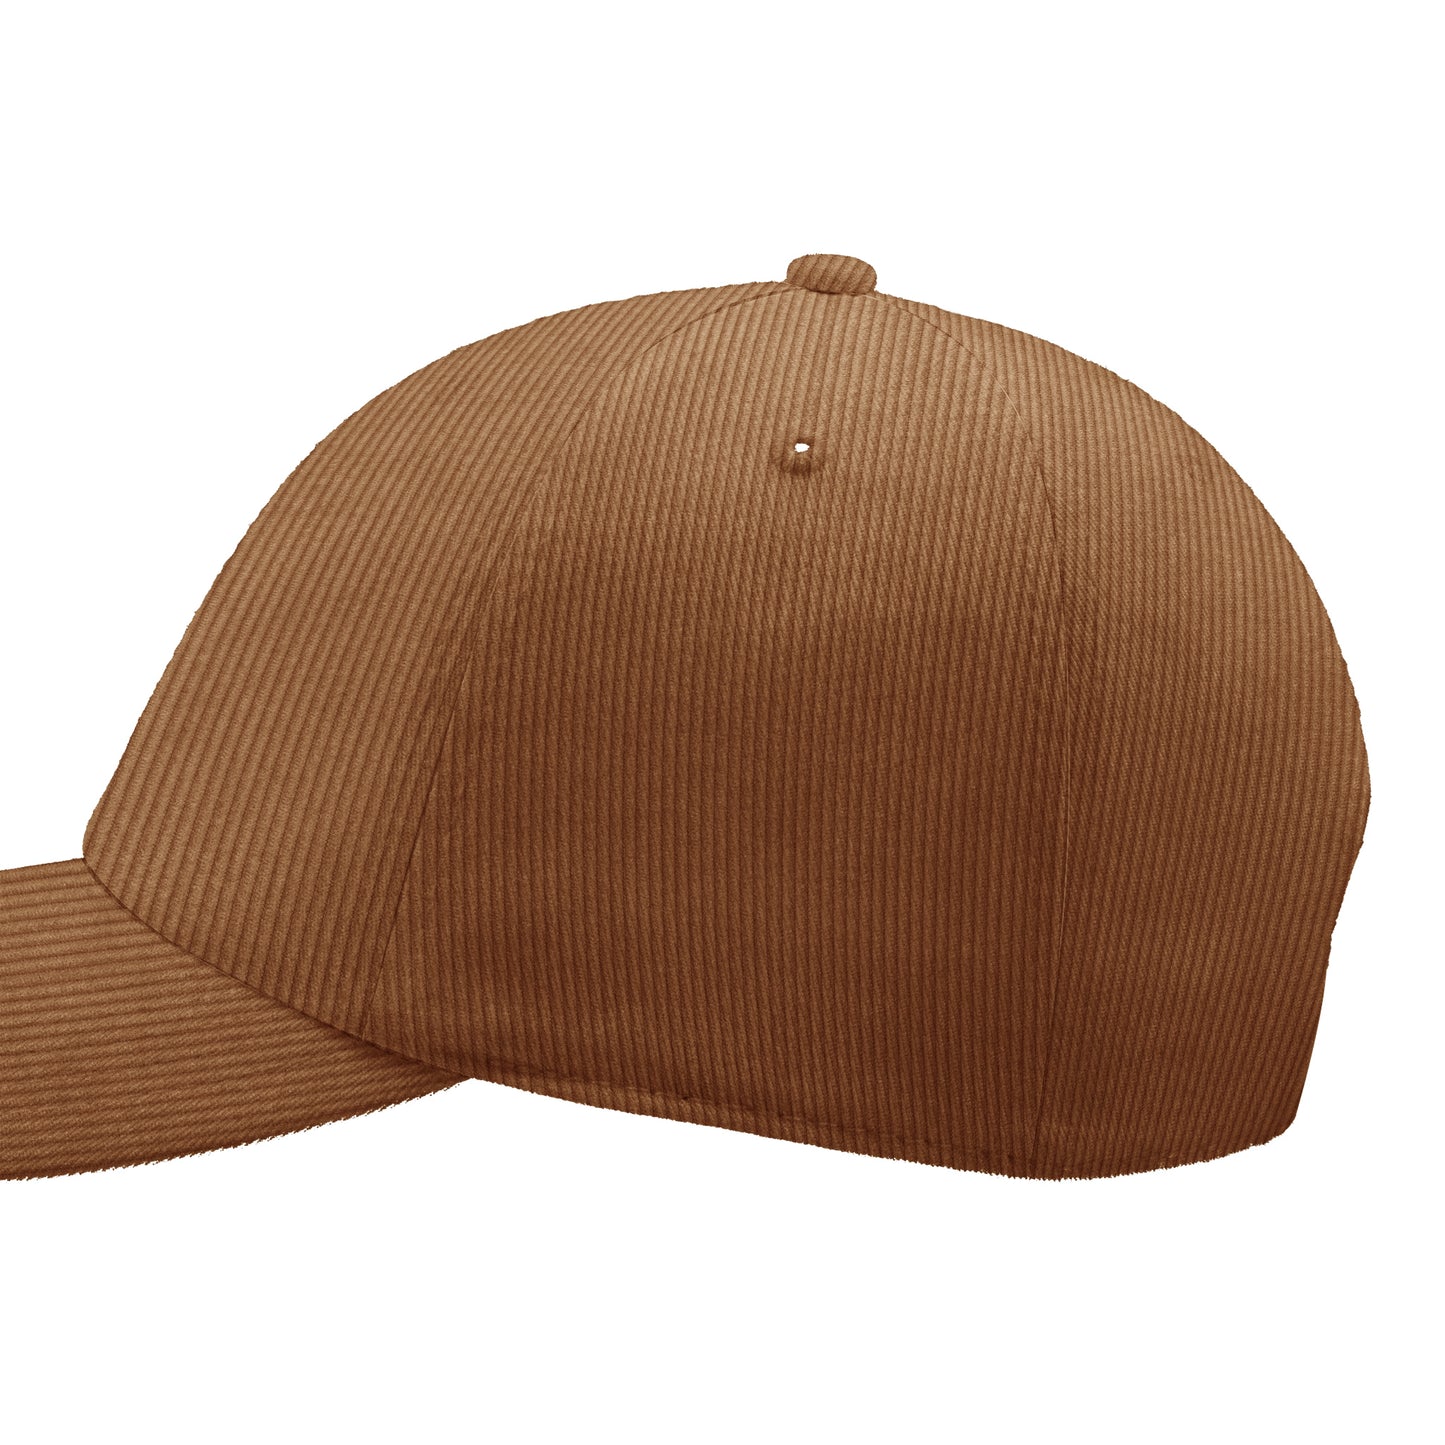 Courdroy Dad Hat Heritage | Beechfield B682 Camel